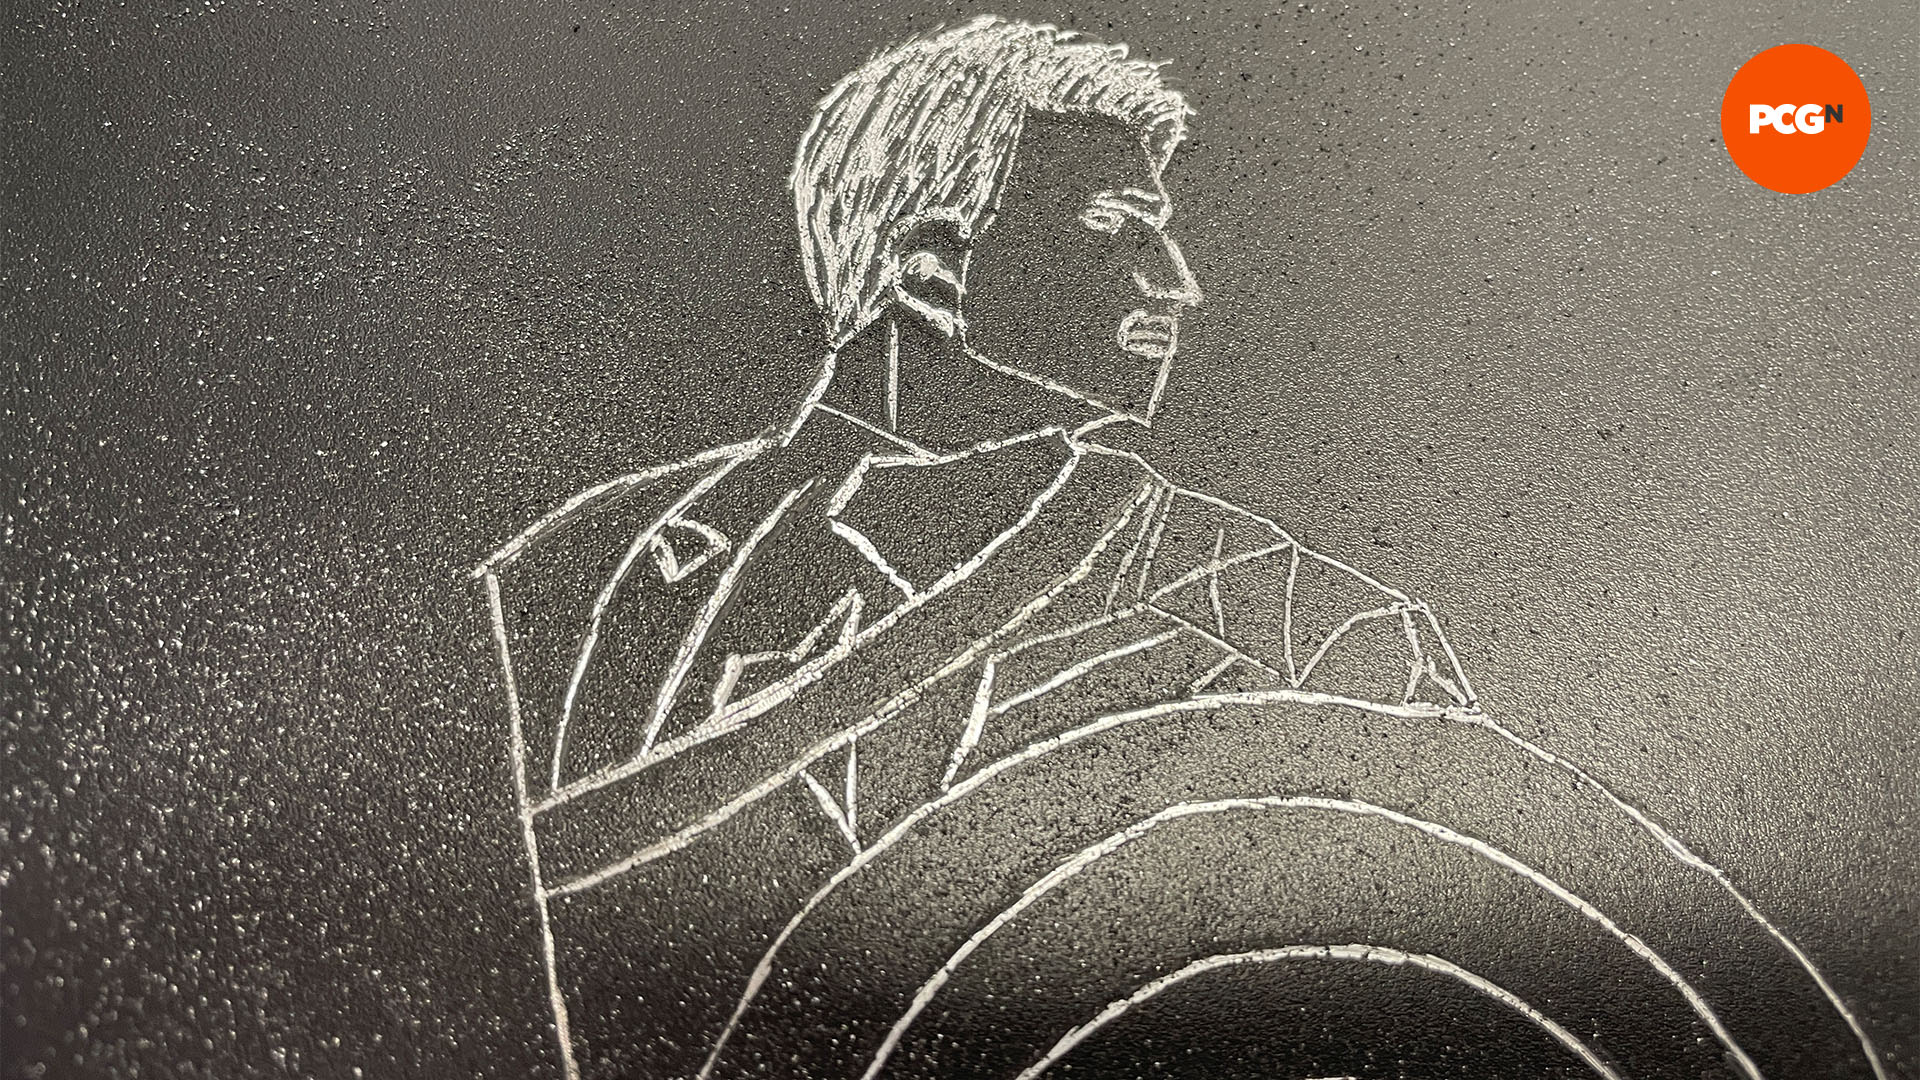 How to engrave your PC case: Follow outlines with Dremel